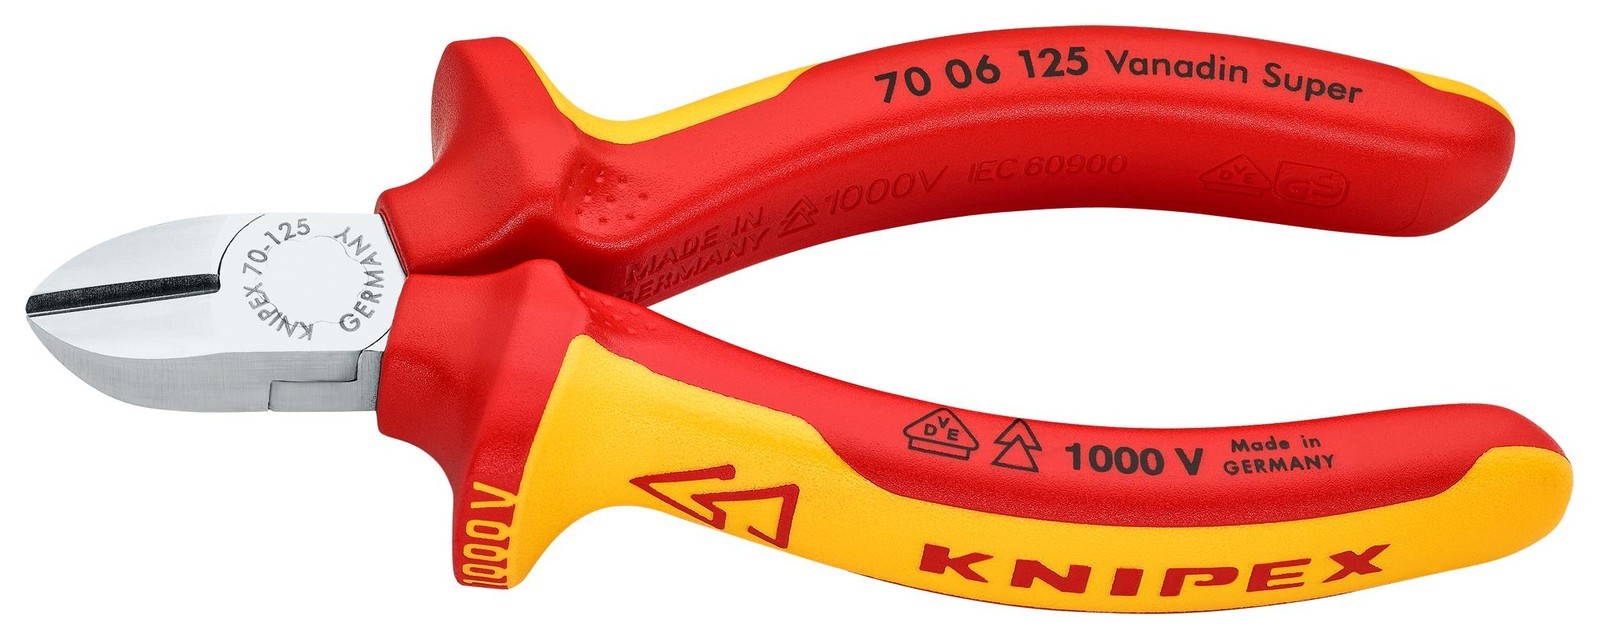 Knipex 70 06 125 Cutter, Side